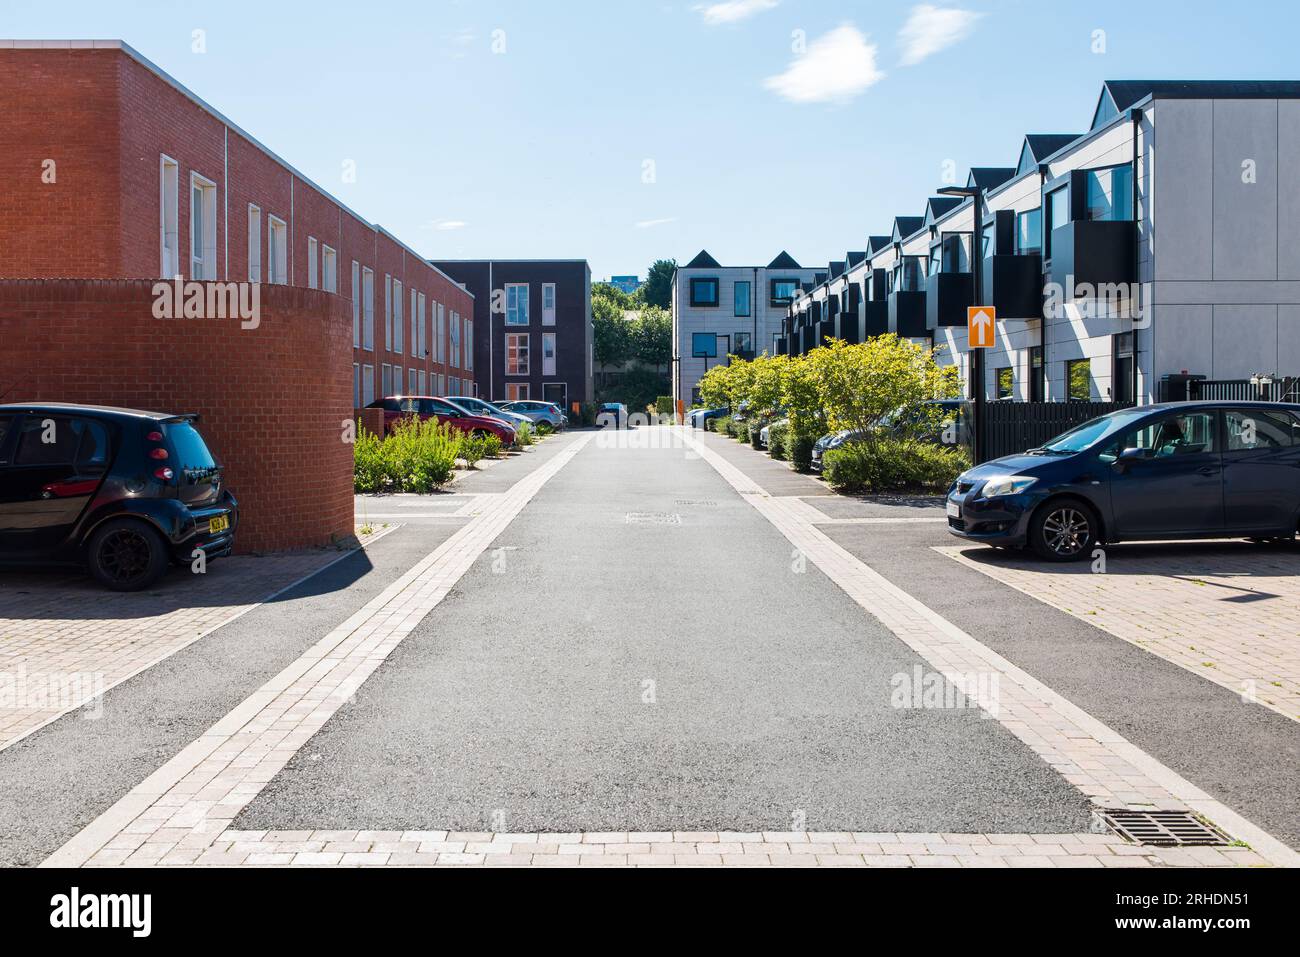 Port Loop is a 43 acre canal-side housing development near Birmingham city centre built on old industrial land. Stock Photo